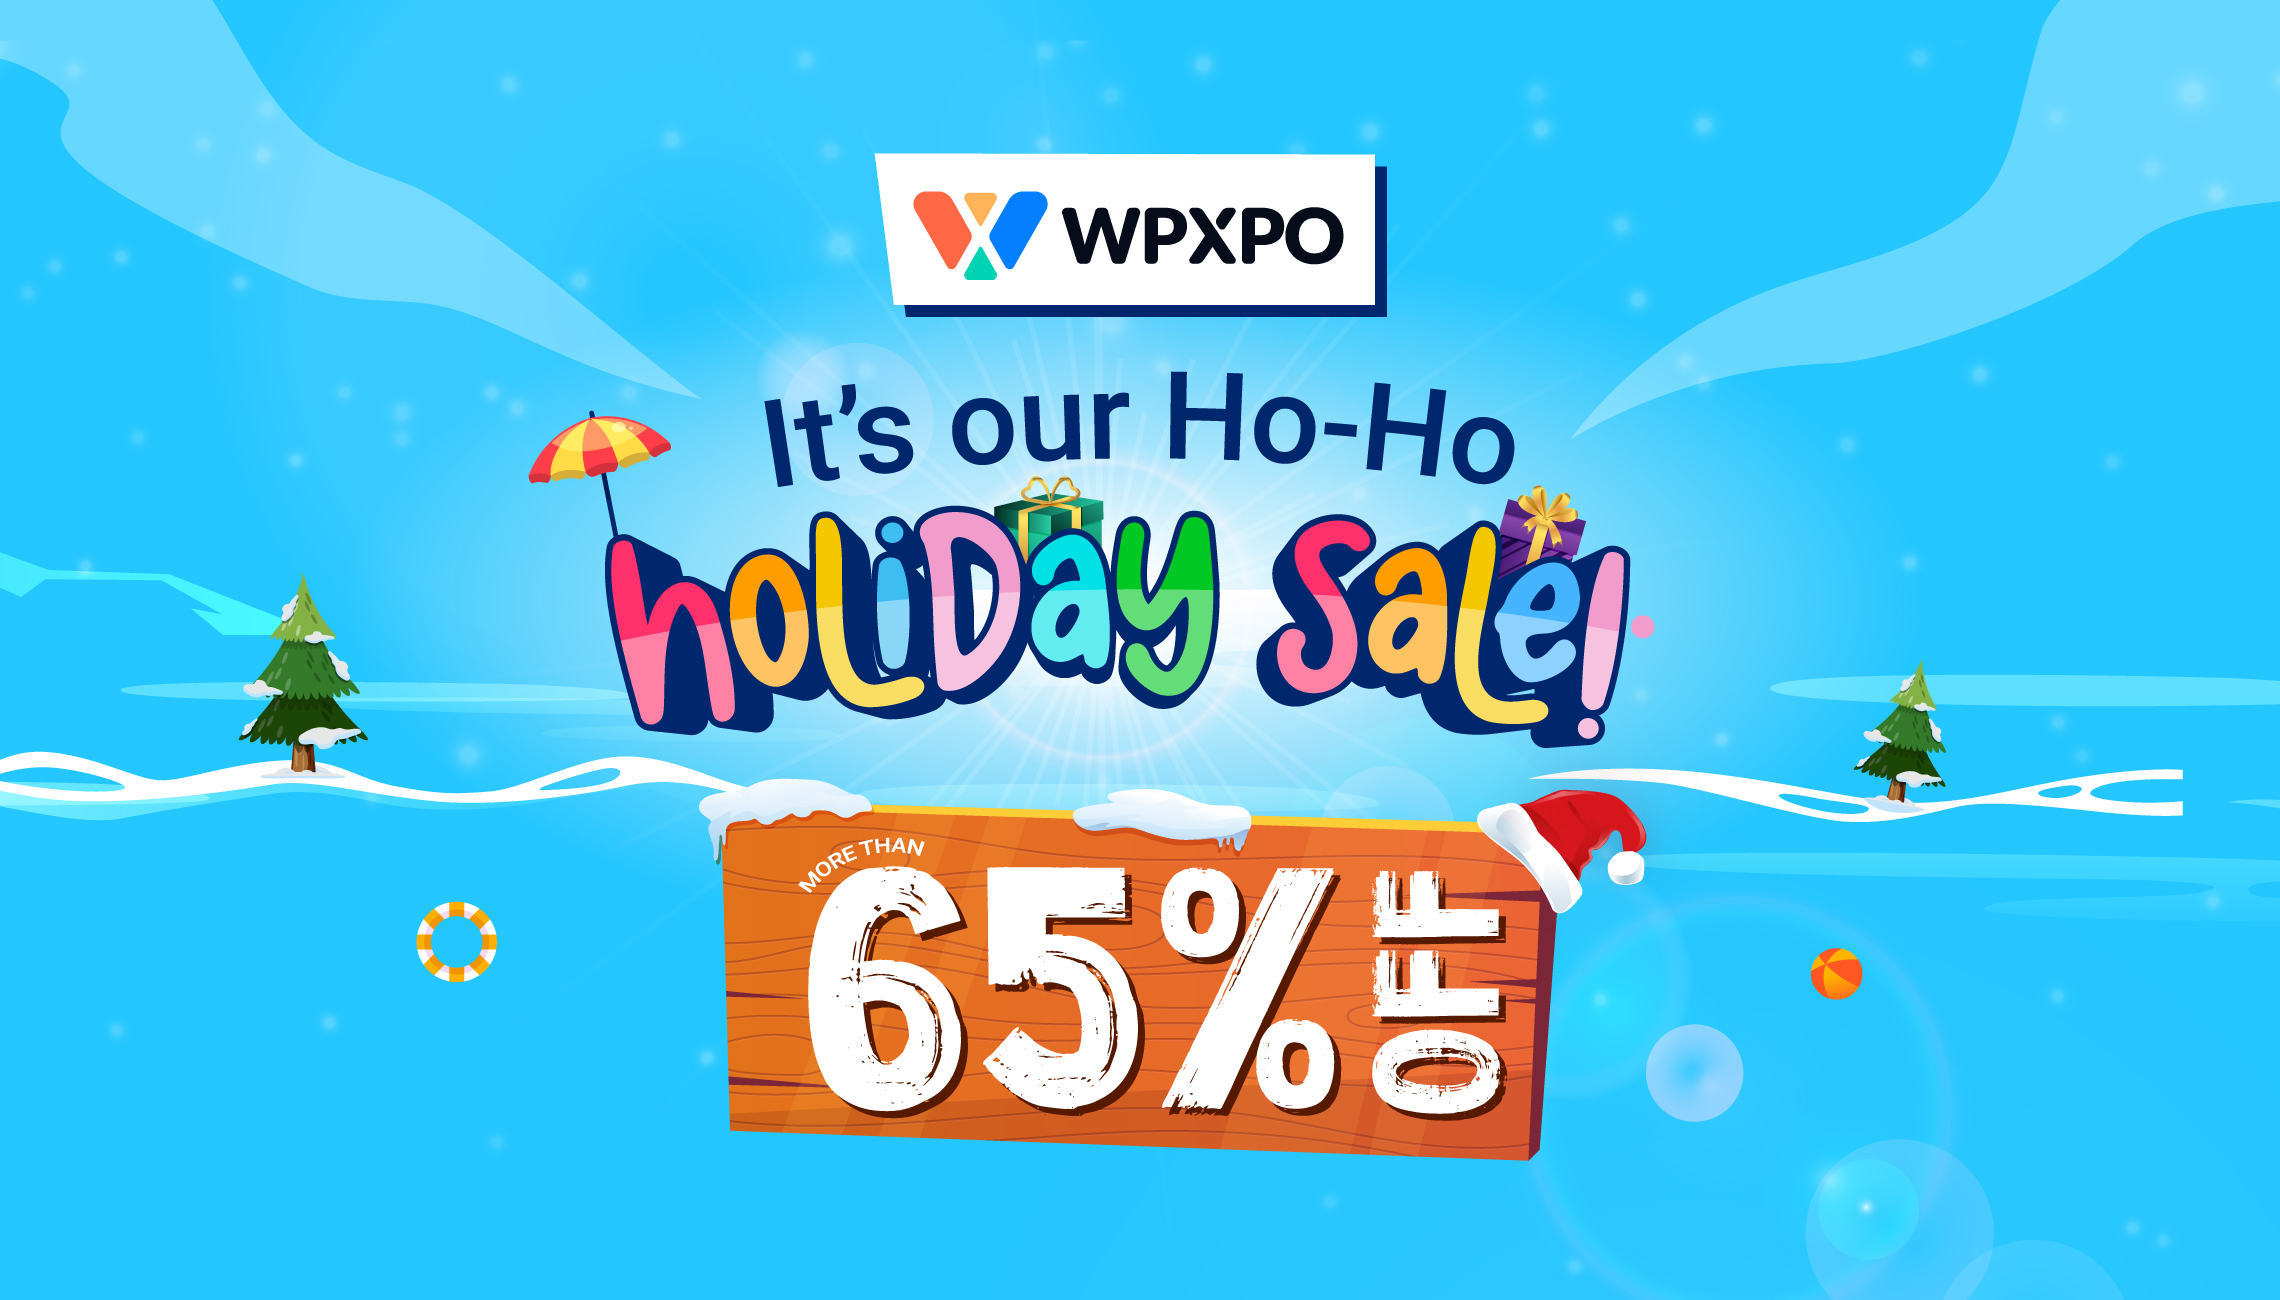 Holiday sales from WPXPO.